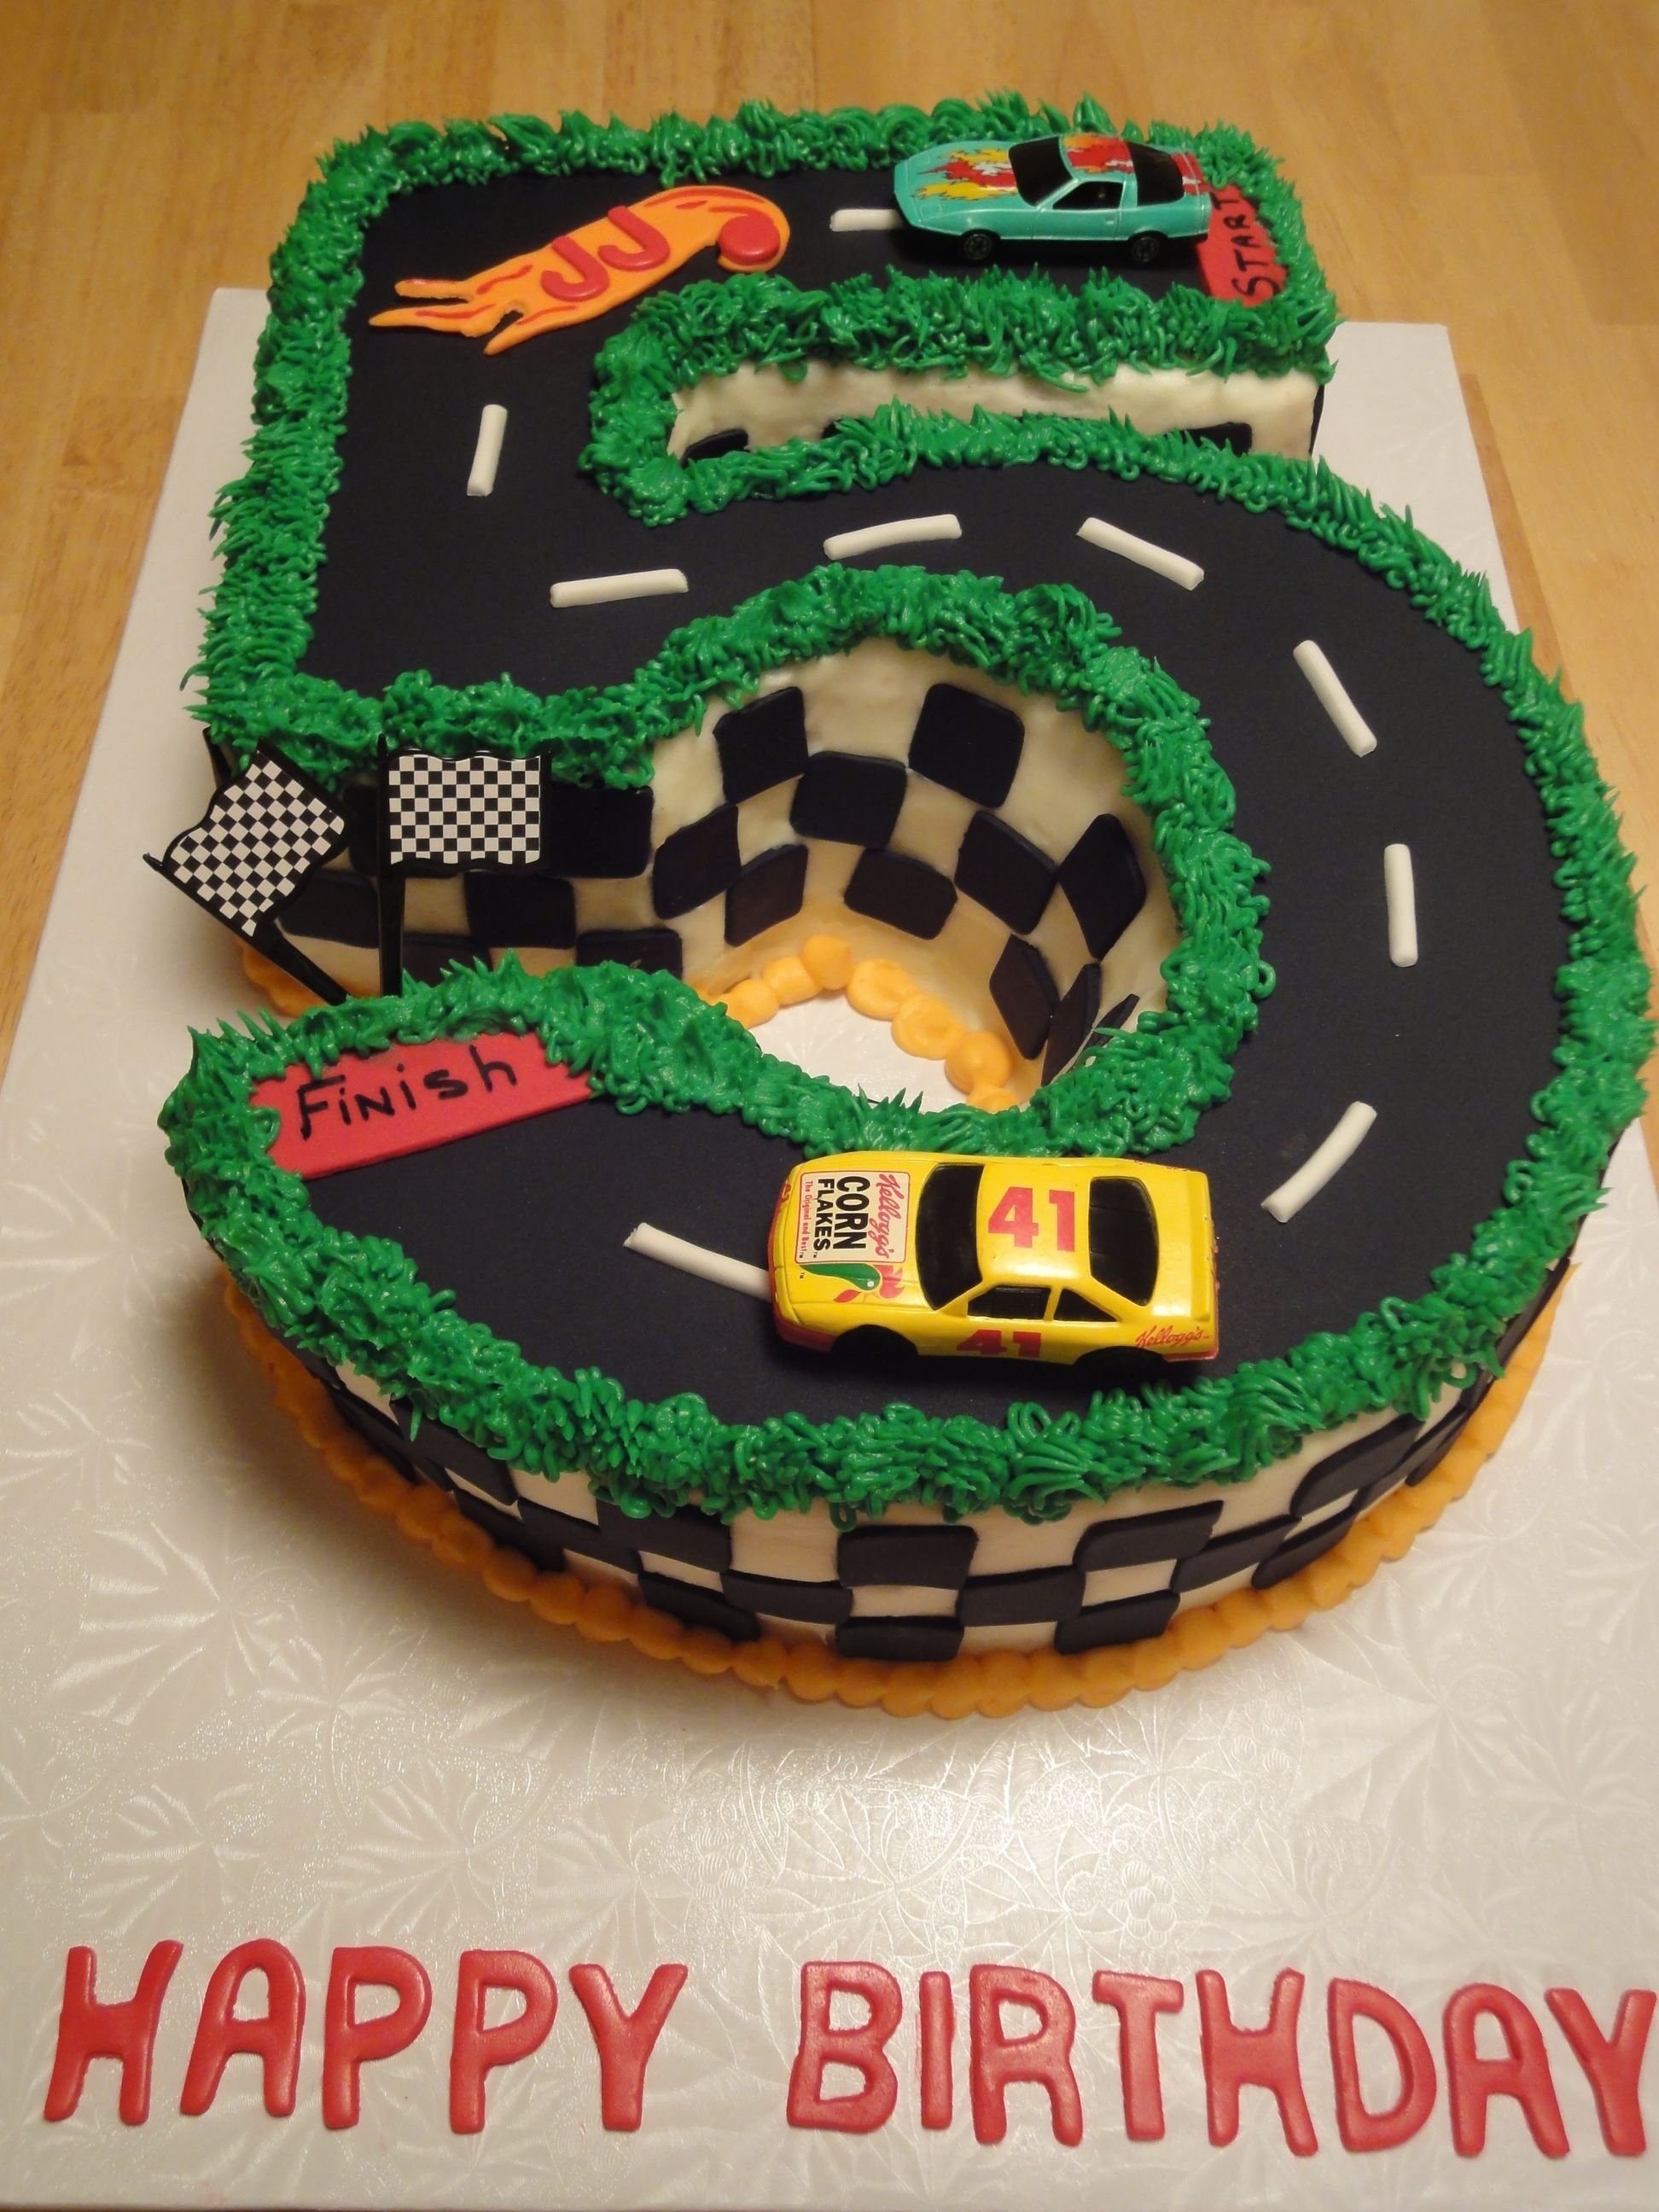 10 Lovely Birthday Ideas For 5 Year Old Boy happy birthday to a 5 year old boy hot wheels cake janies sweet 2 2022